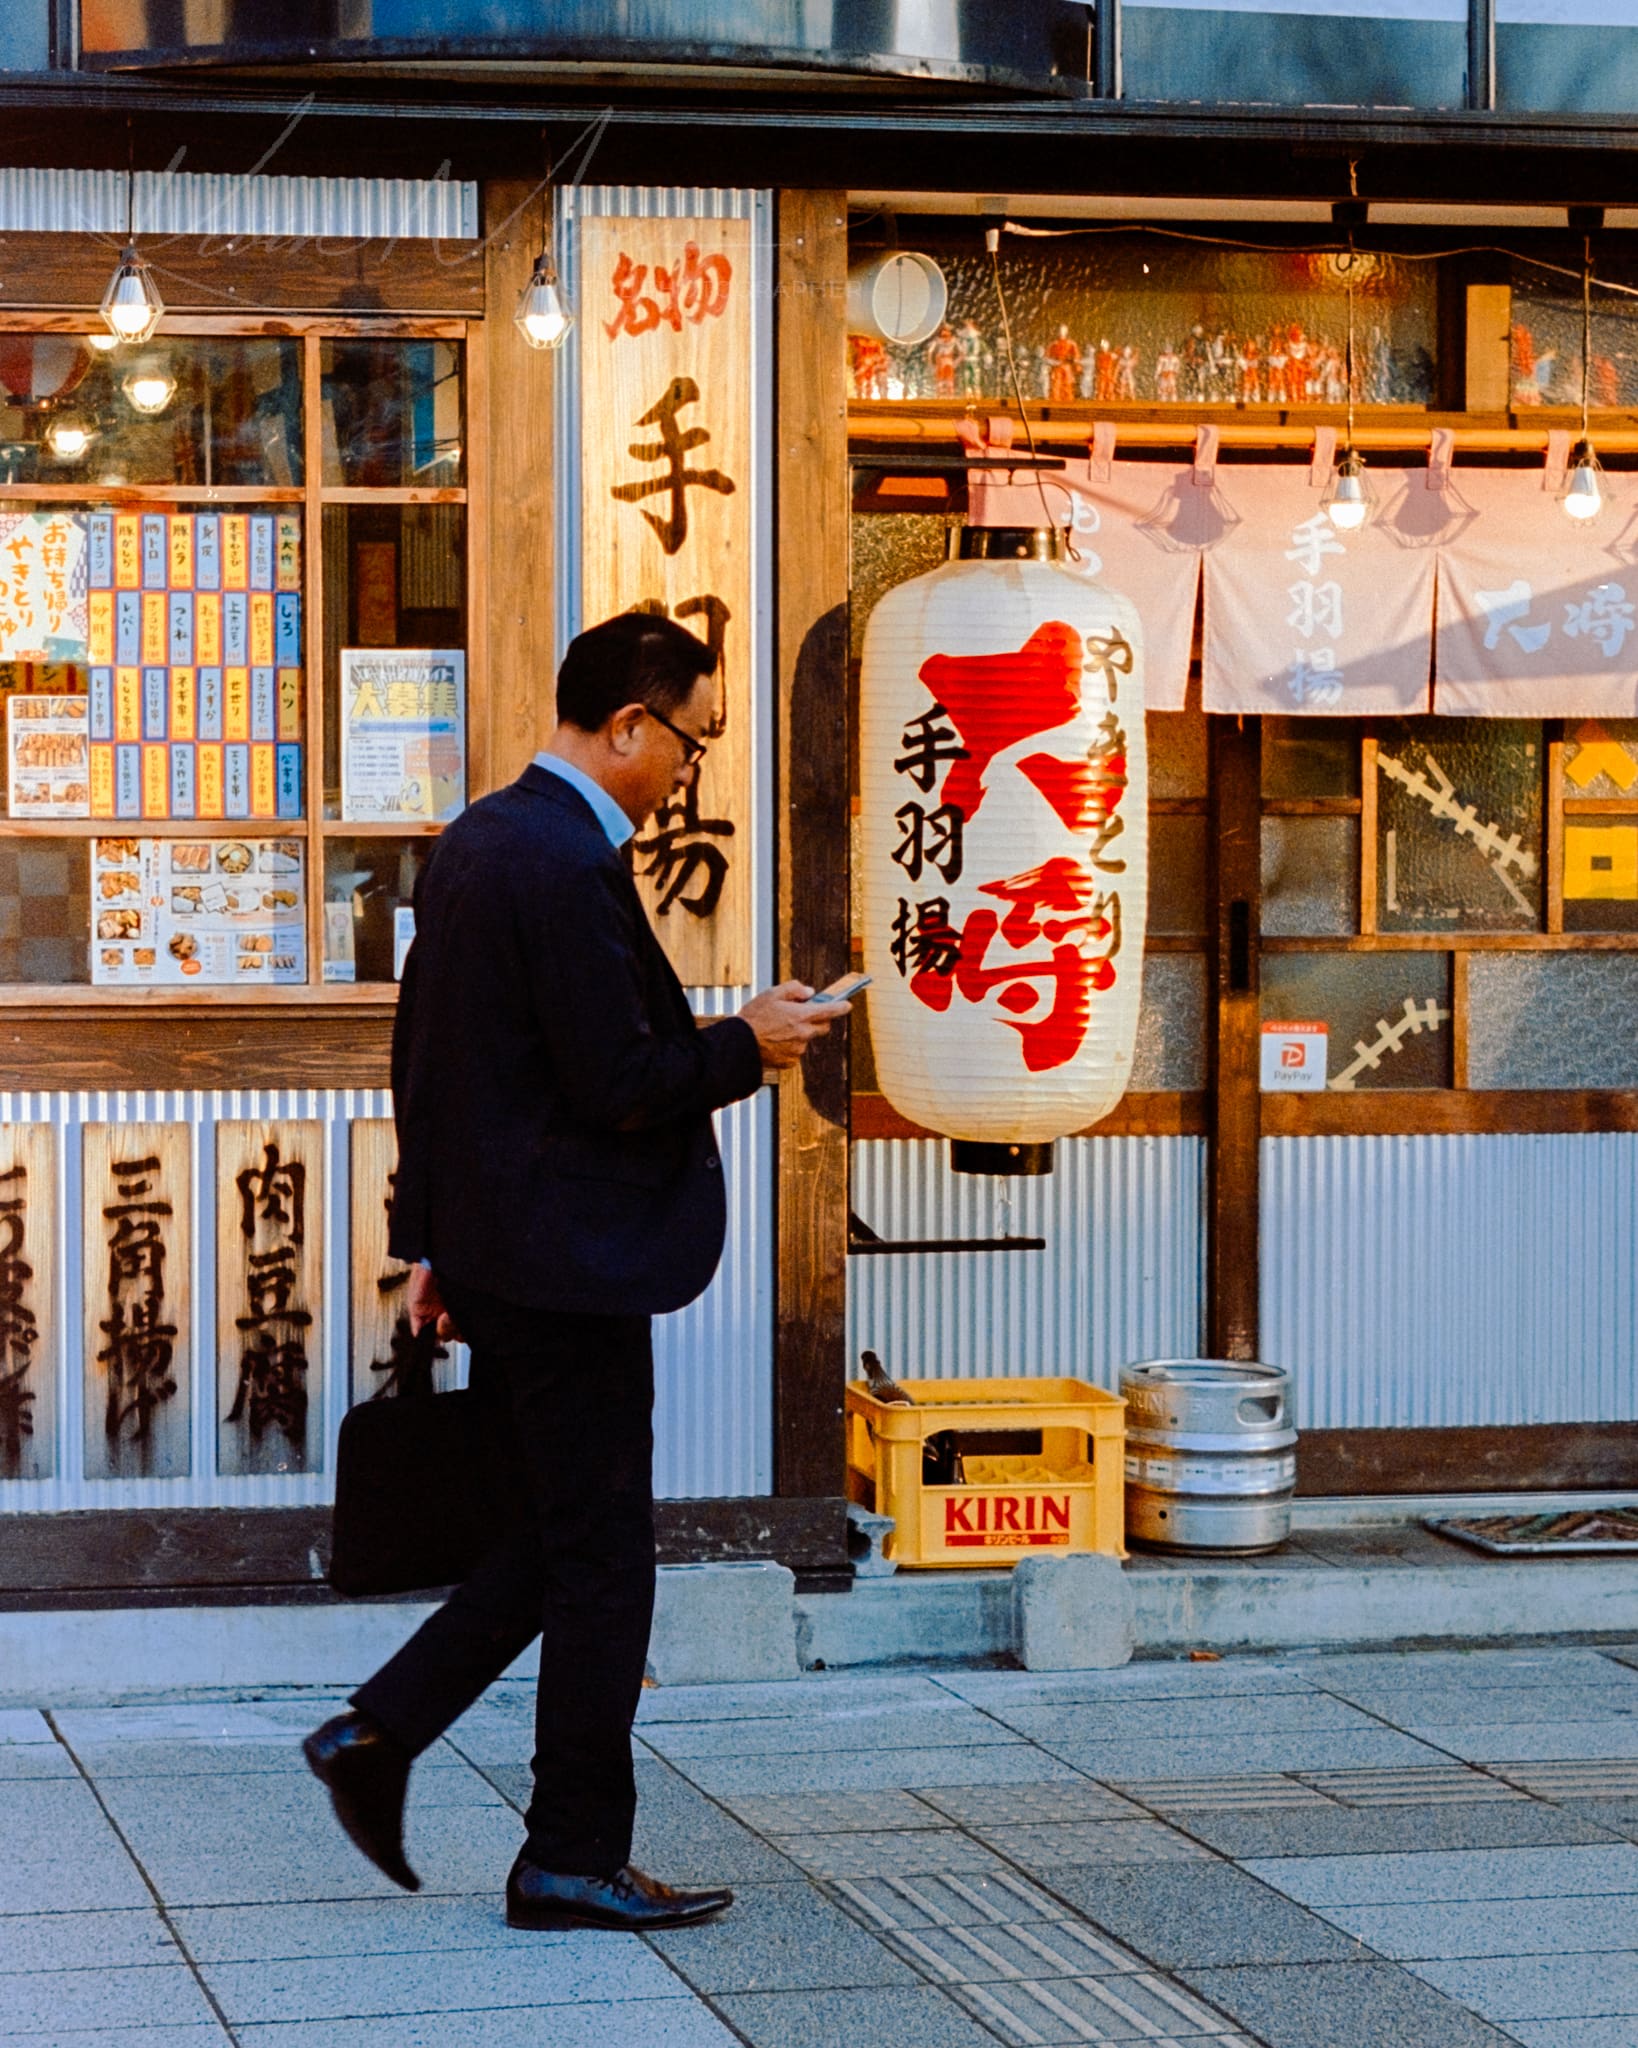 Businessman passing by a traditional Japanese restaurant at dusk in urban cityscape.